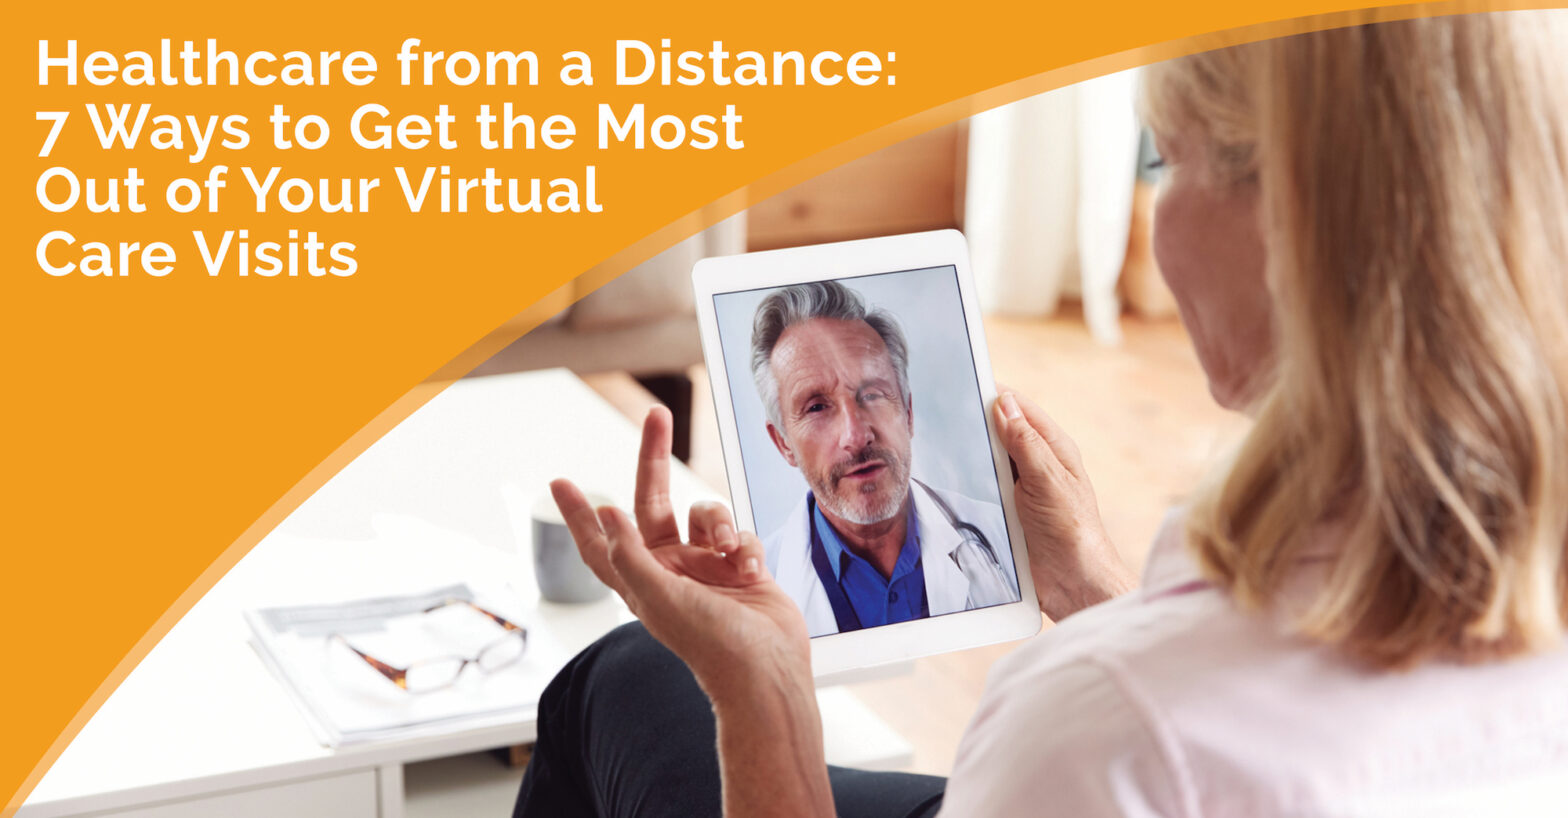 Healthcare from a Distance: 7 Ways to Get the Most Out of Your Virtual Care Visits